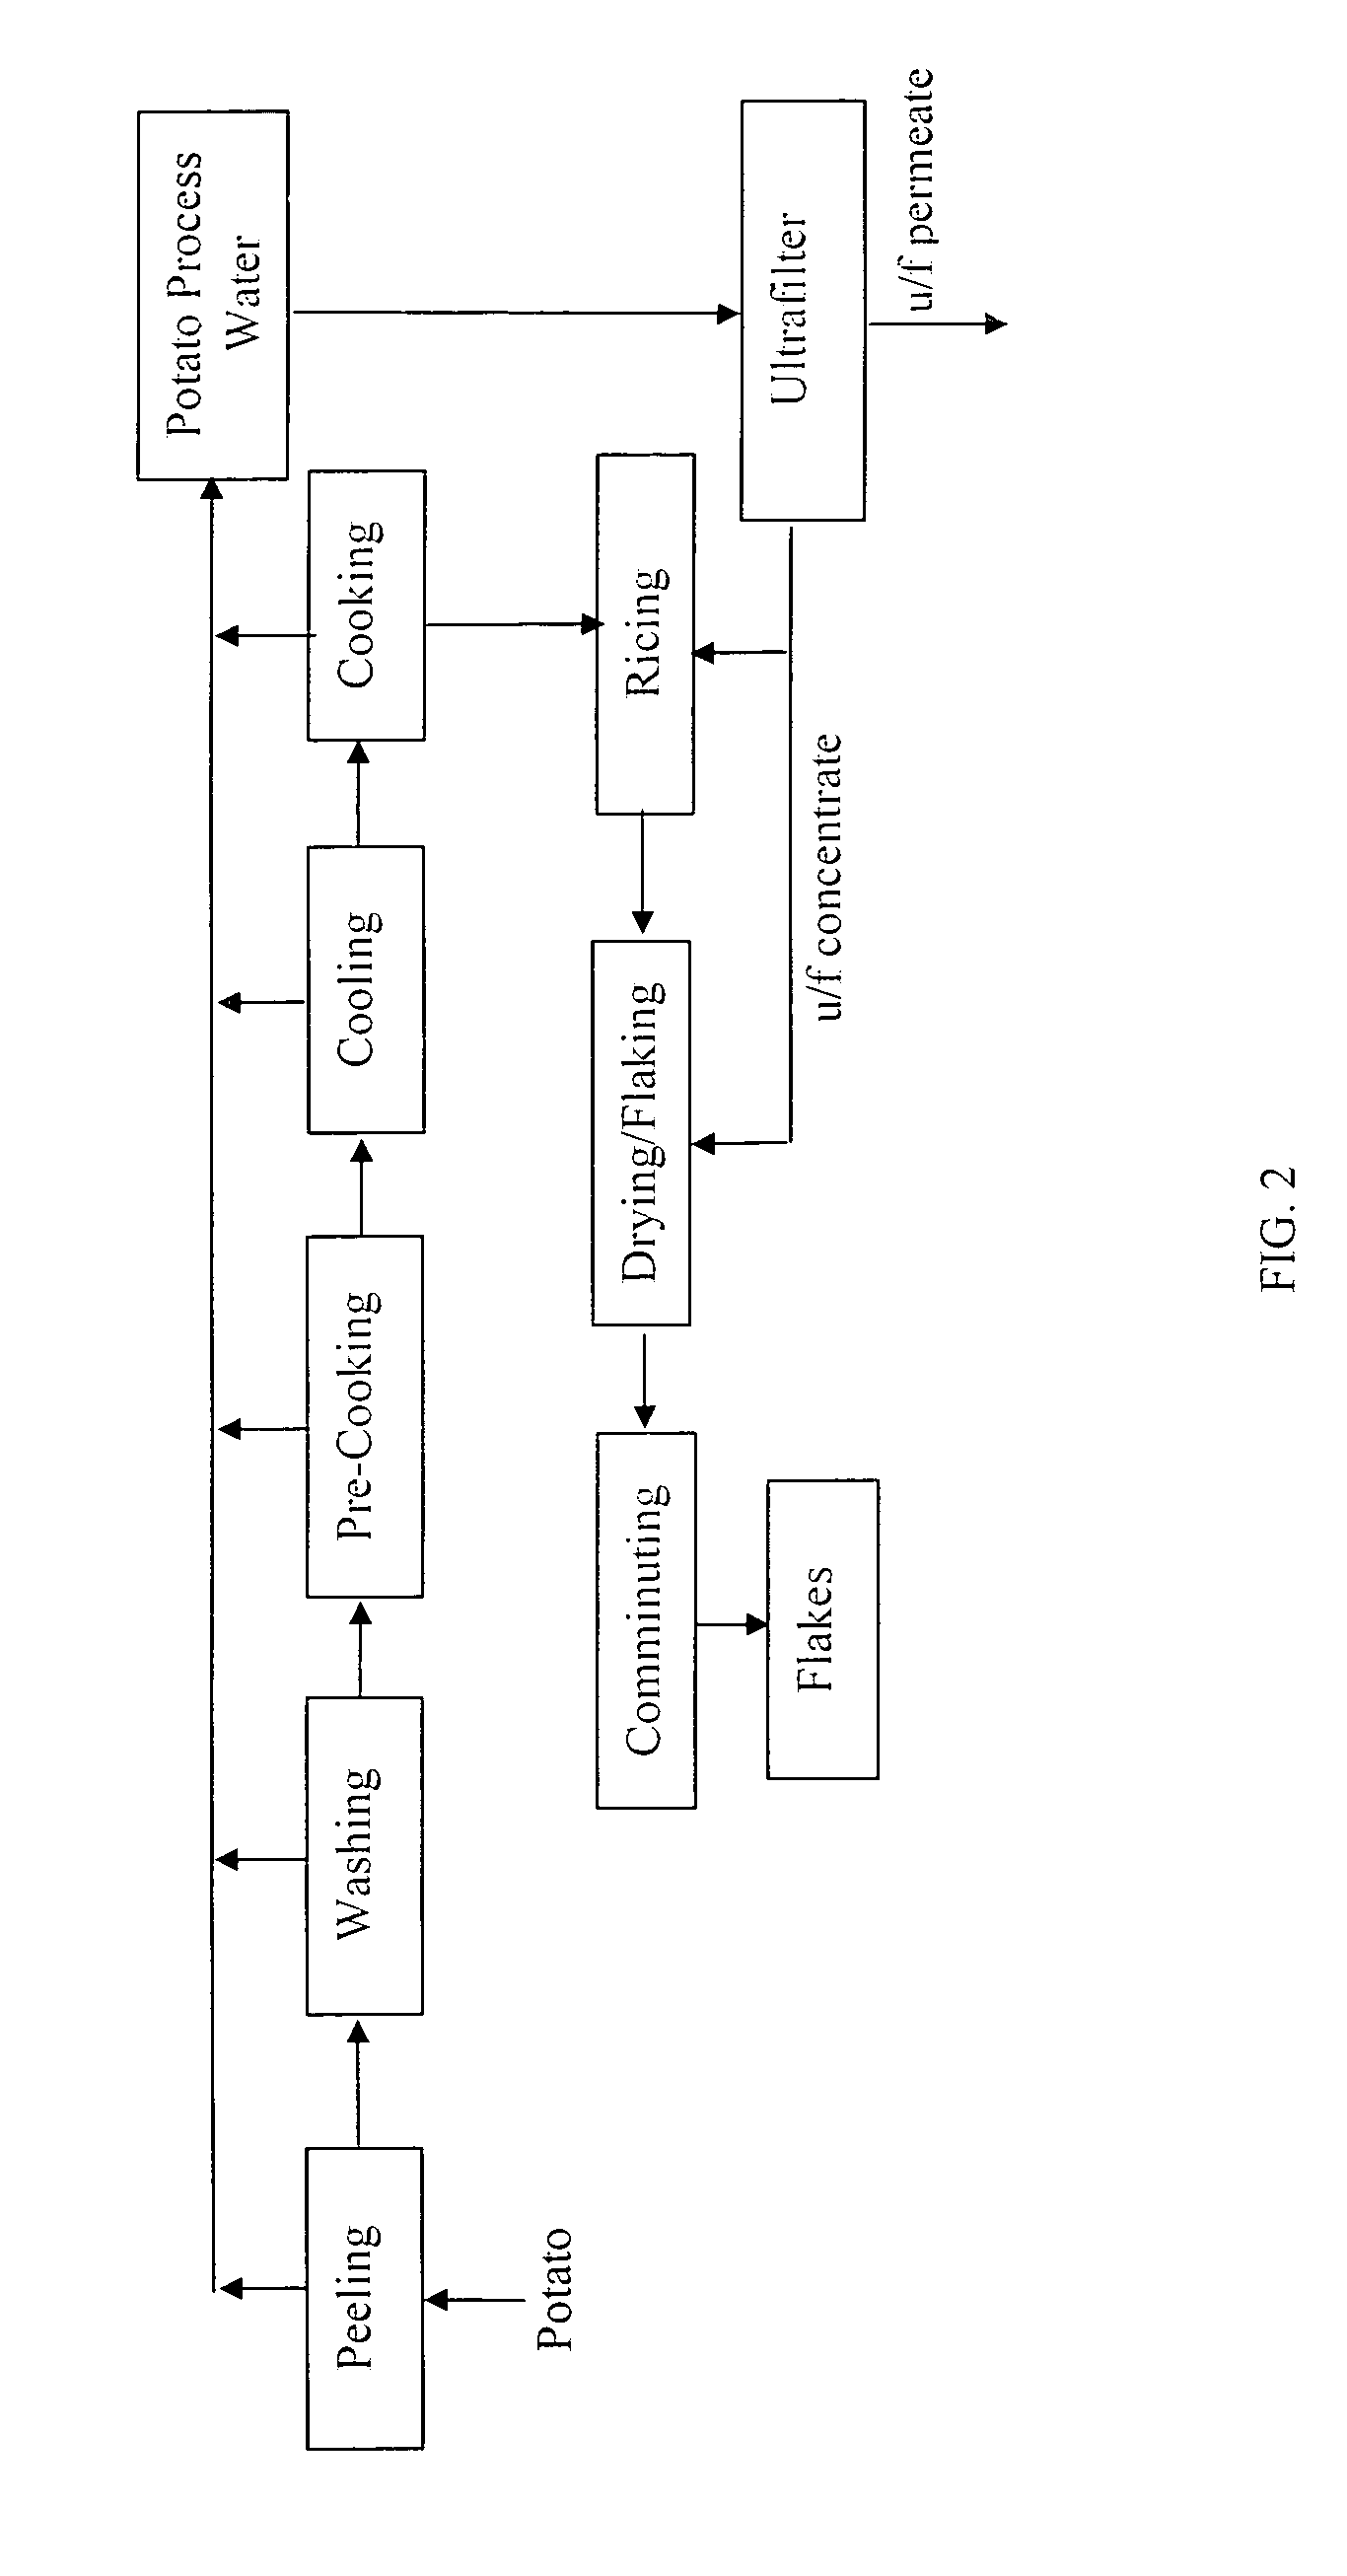 Method for filtering and recovering solids from potato process water